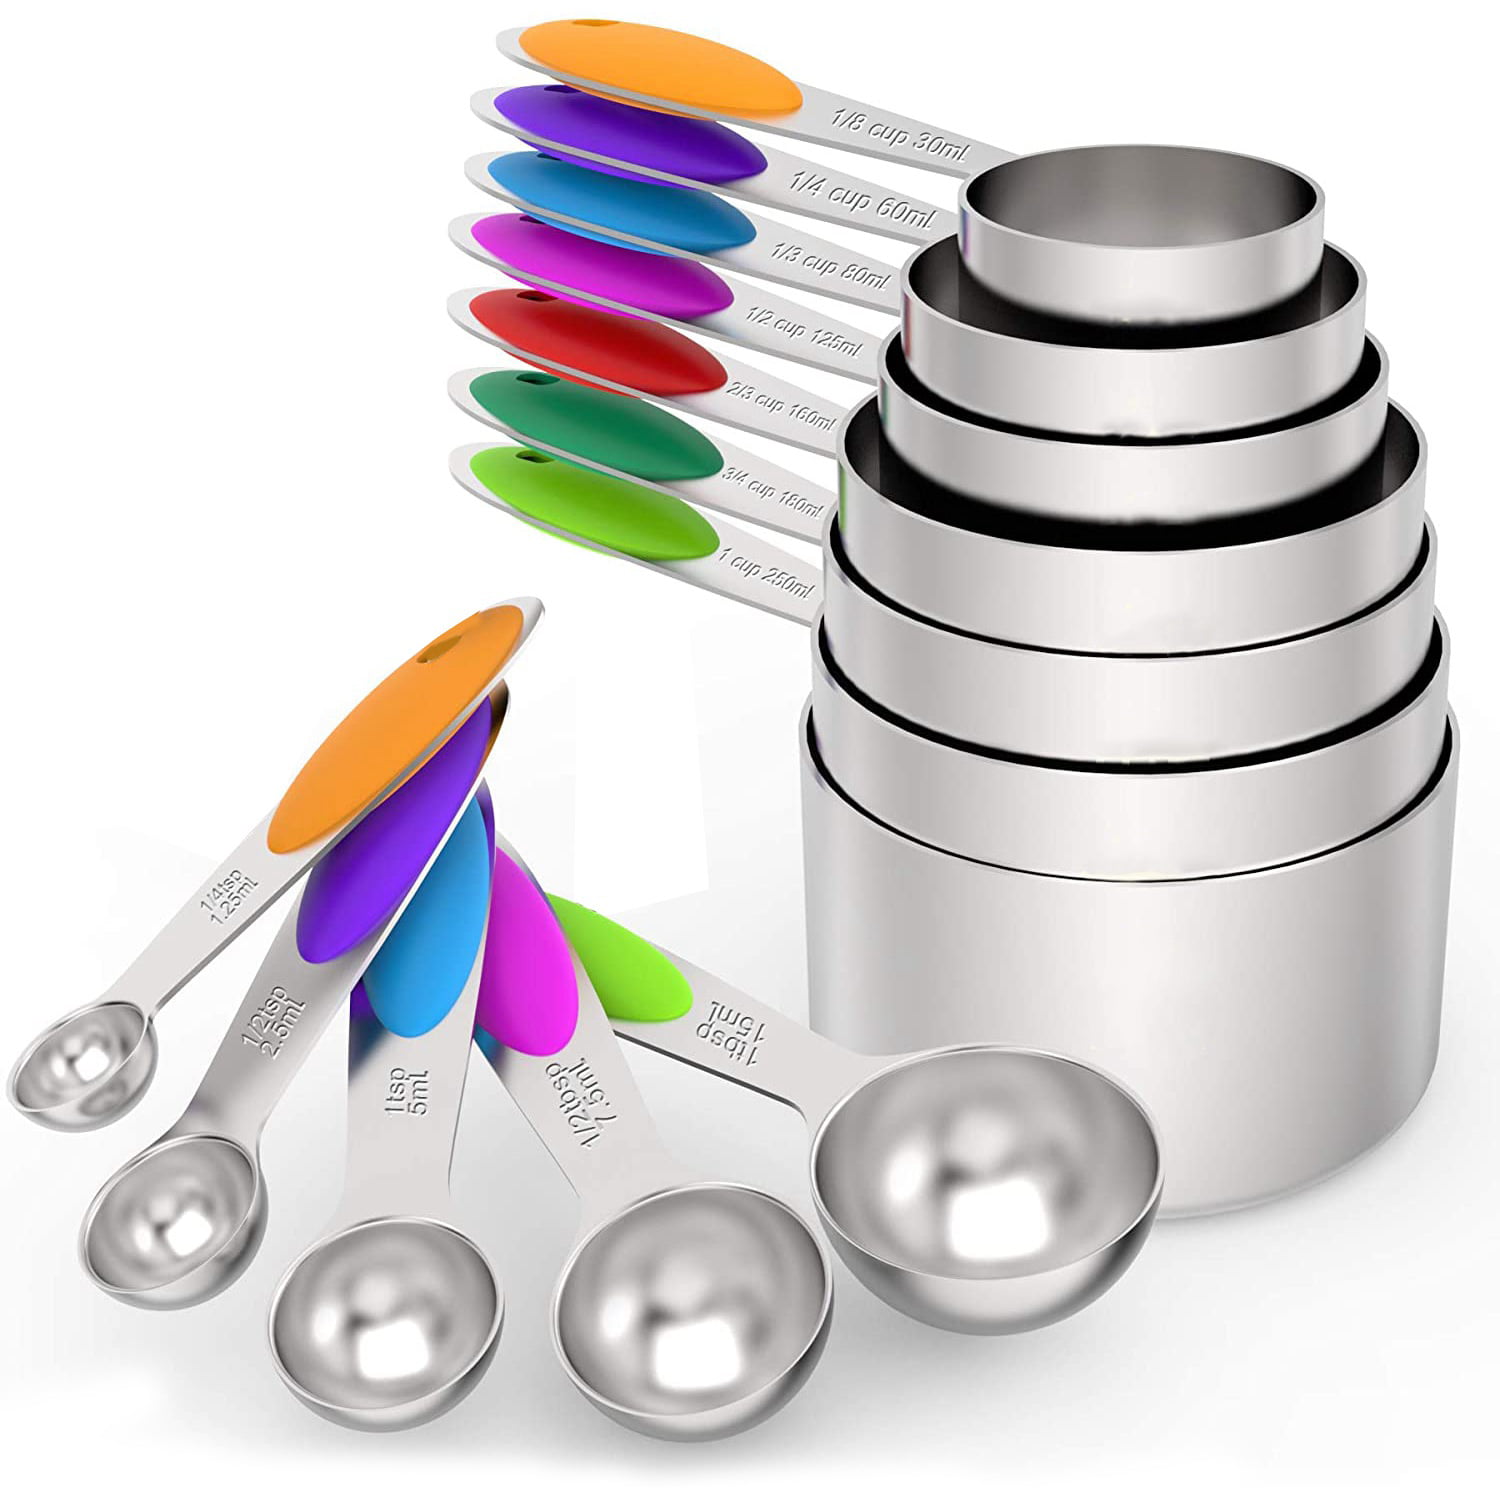 Set of Stainless Steel 7 Measur BASSTOP Measuring Cups and Measuring Spoons Set 